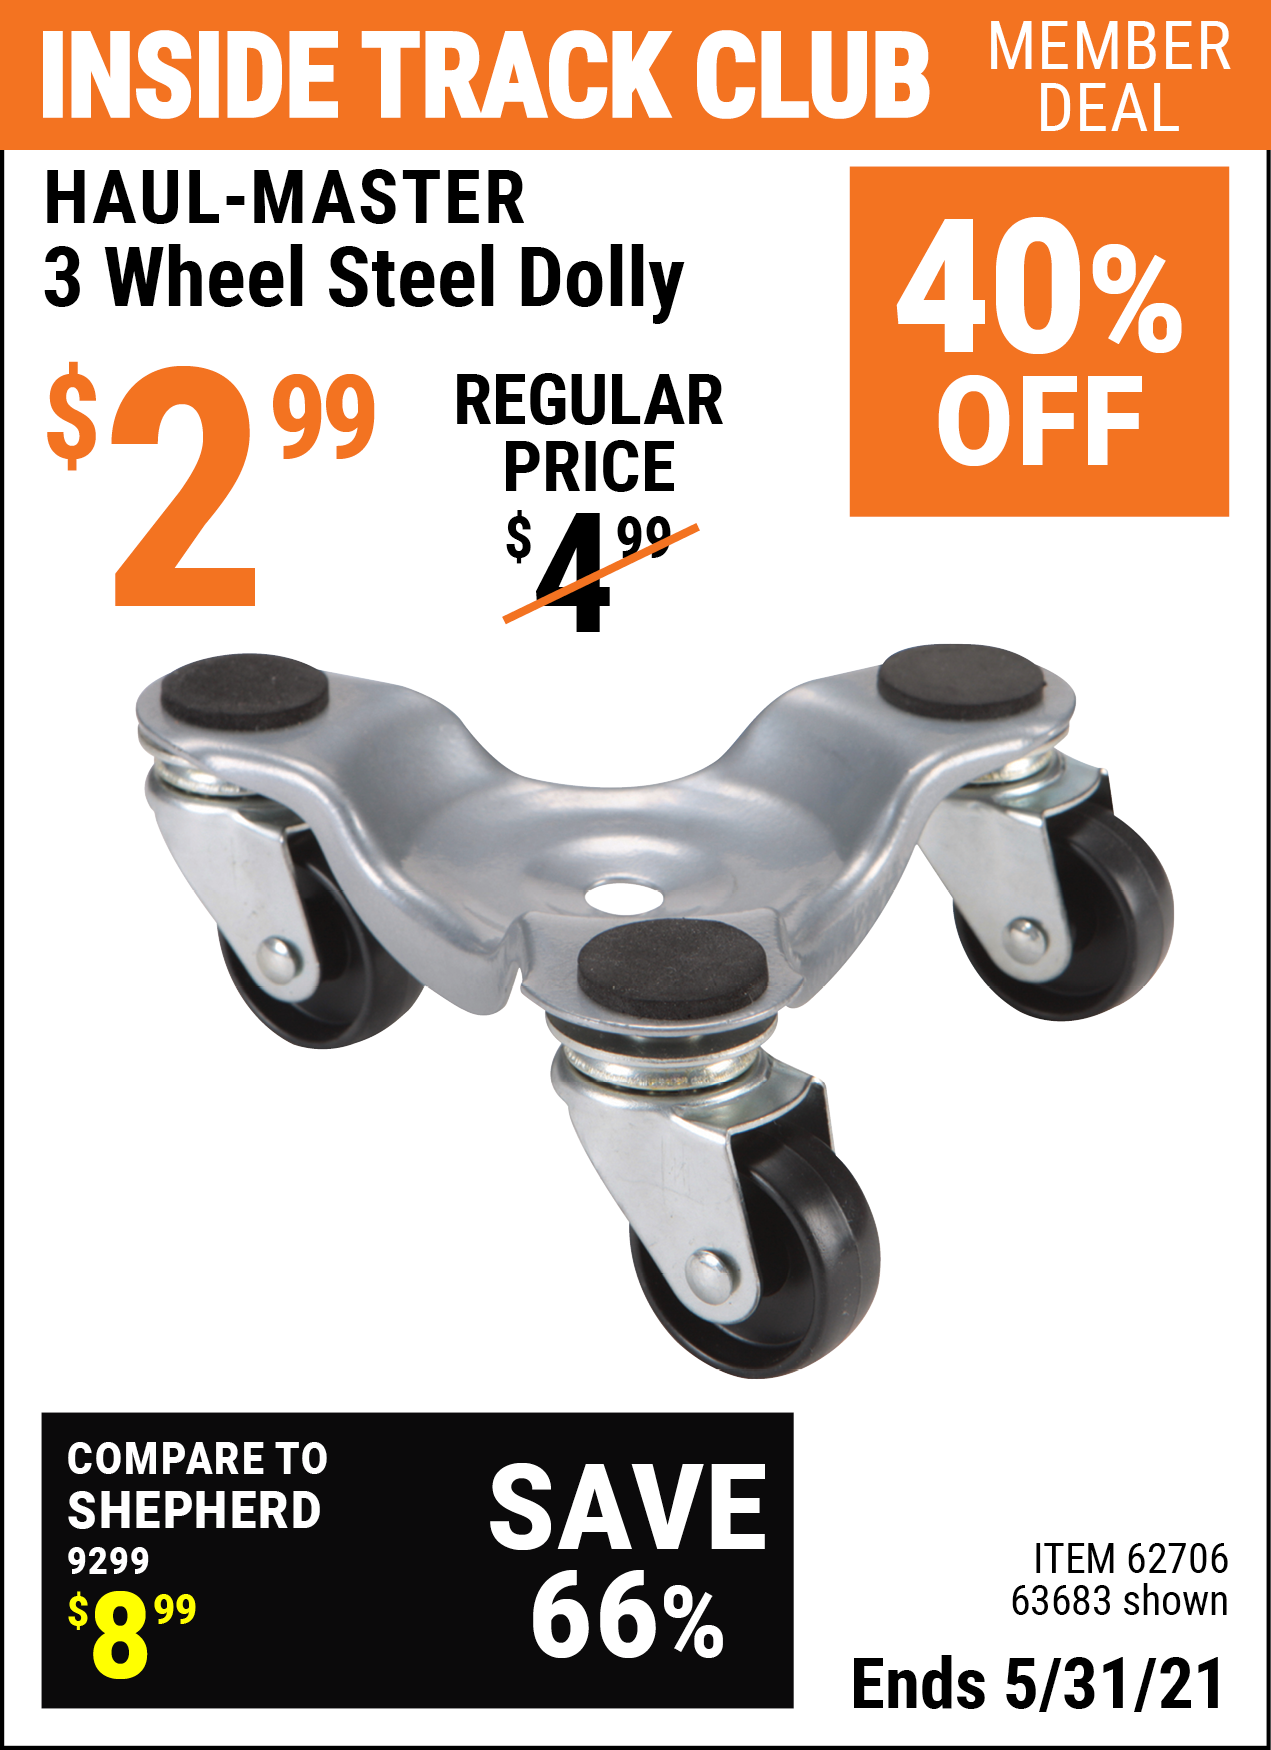 Inside Track Club members can buy the HAUL-MASTER 3 Wheel Steel Dolly (Item 63683/62706) for $2.99, valid through 5/31/2021.